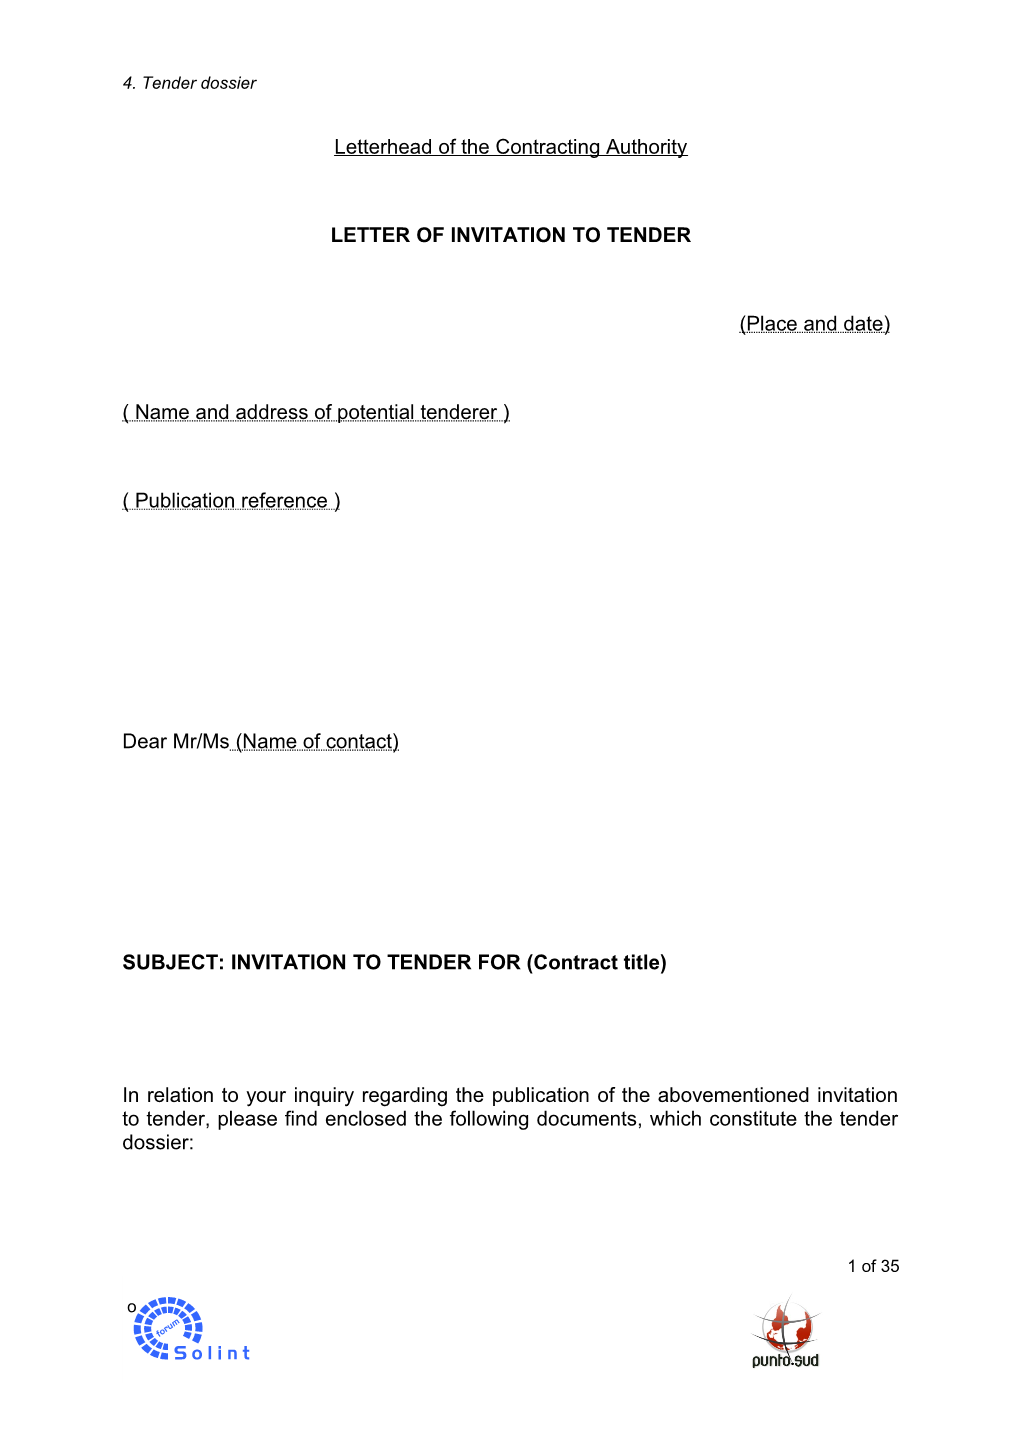 Letterhead of the Contracting Authority